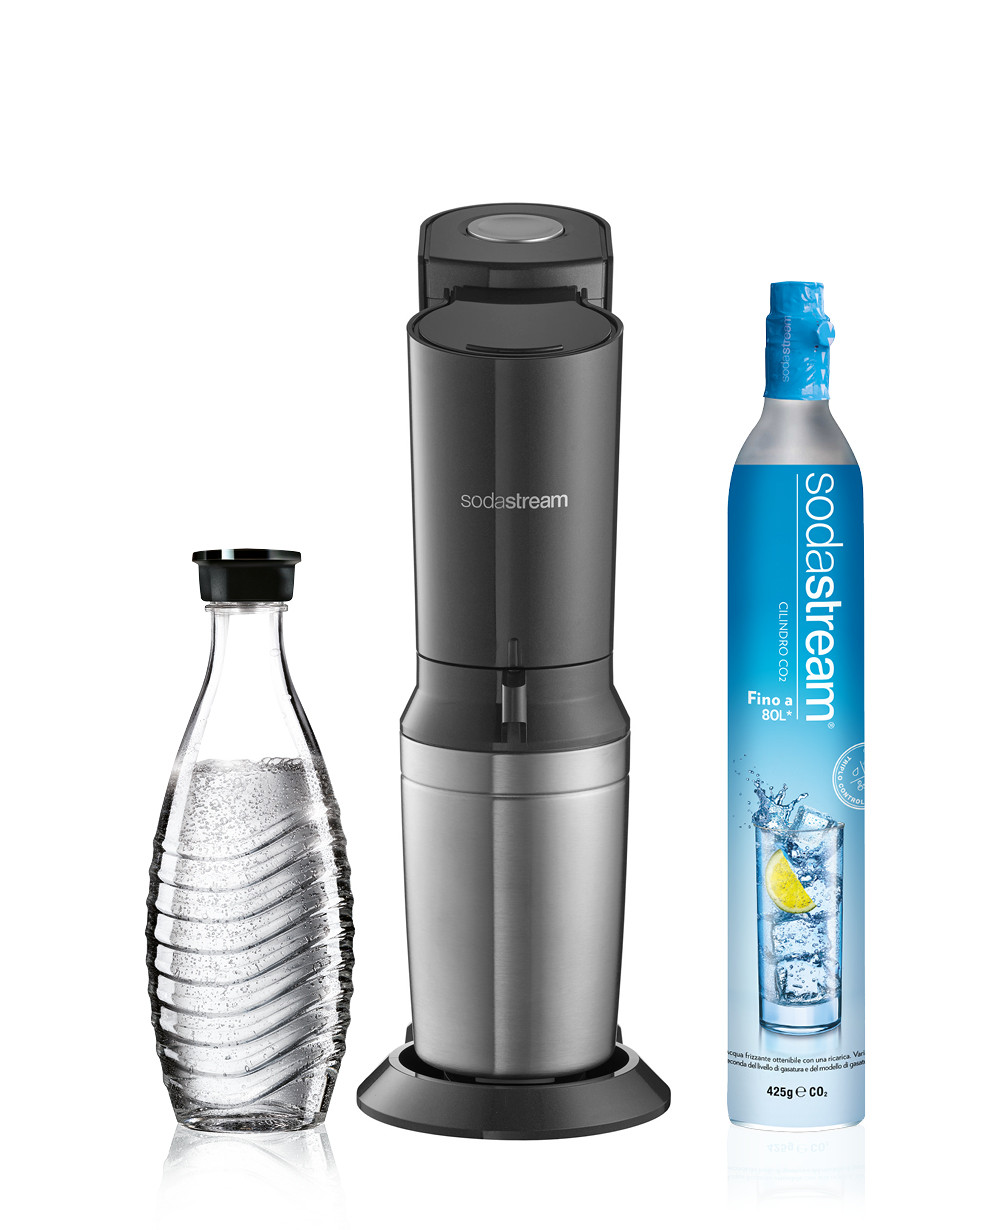 https://www.sodastream.it/file-manager/api/get-image/1843